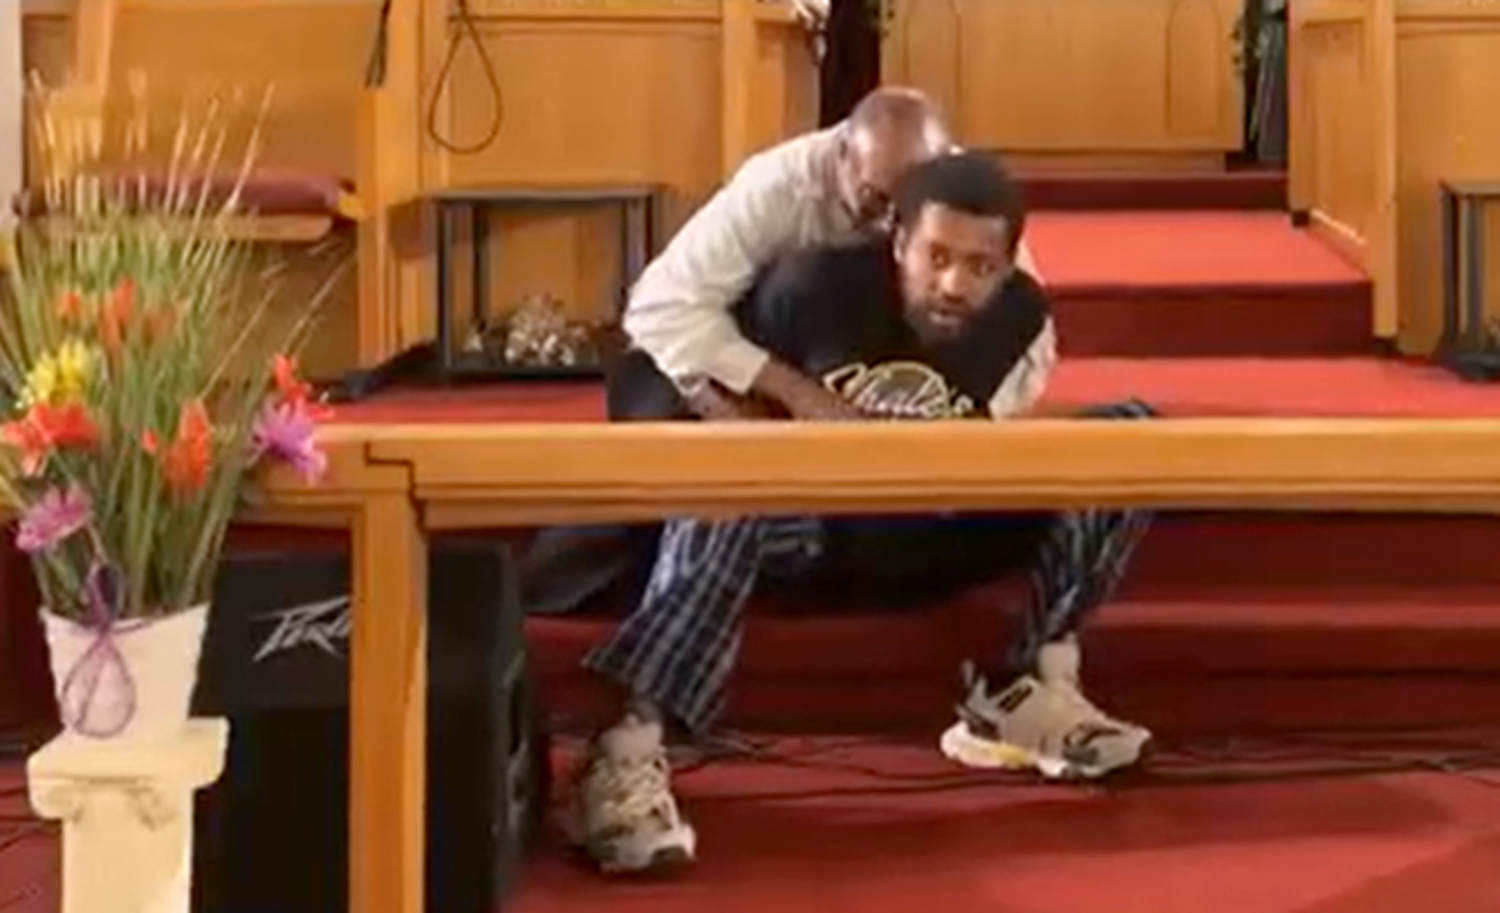 Man who tried to shoot pastor during service livestream is charged in cousin's death that same day